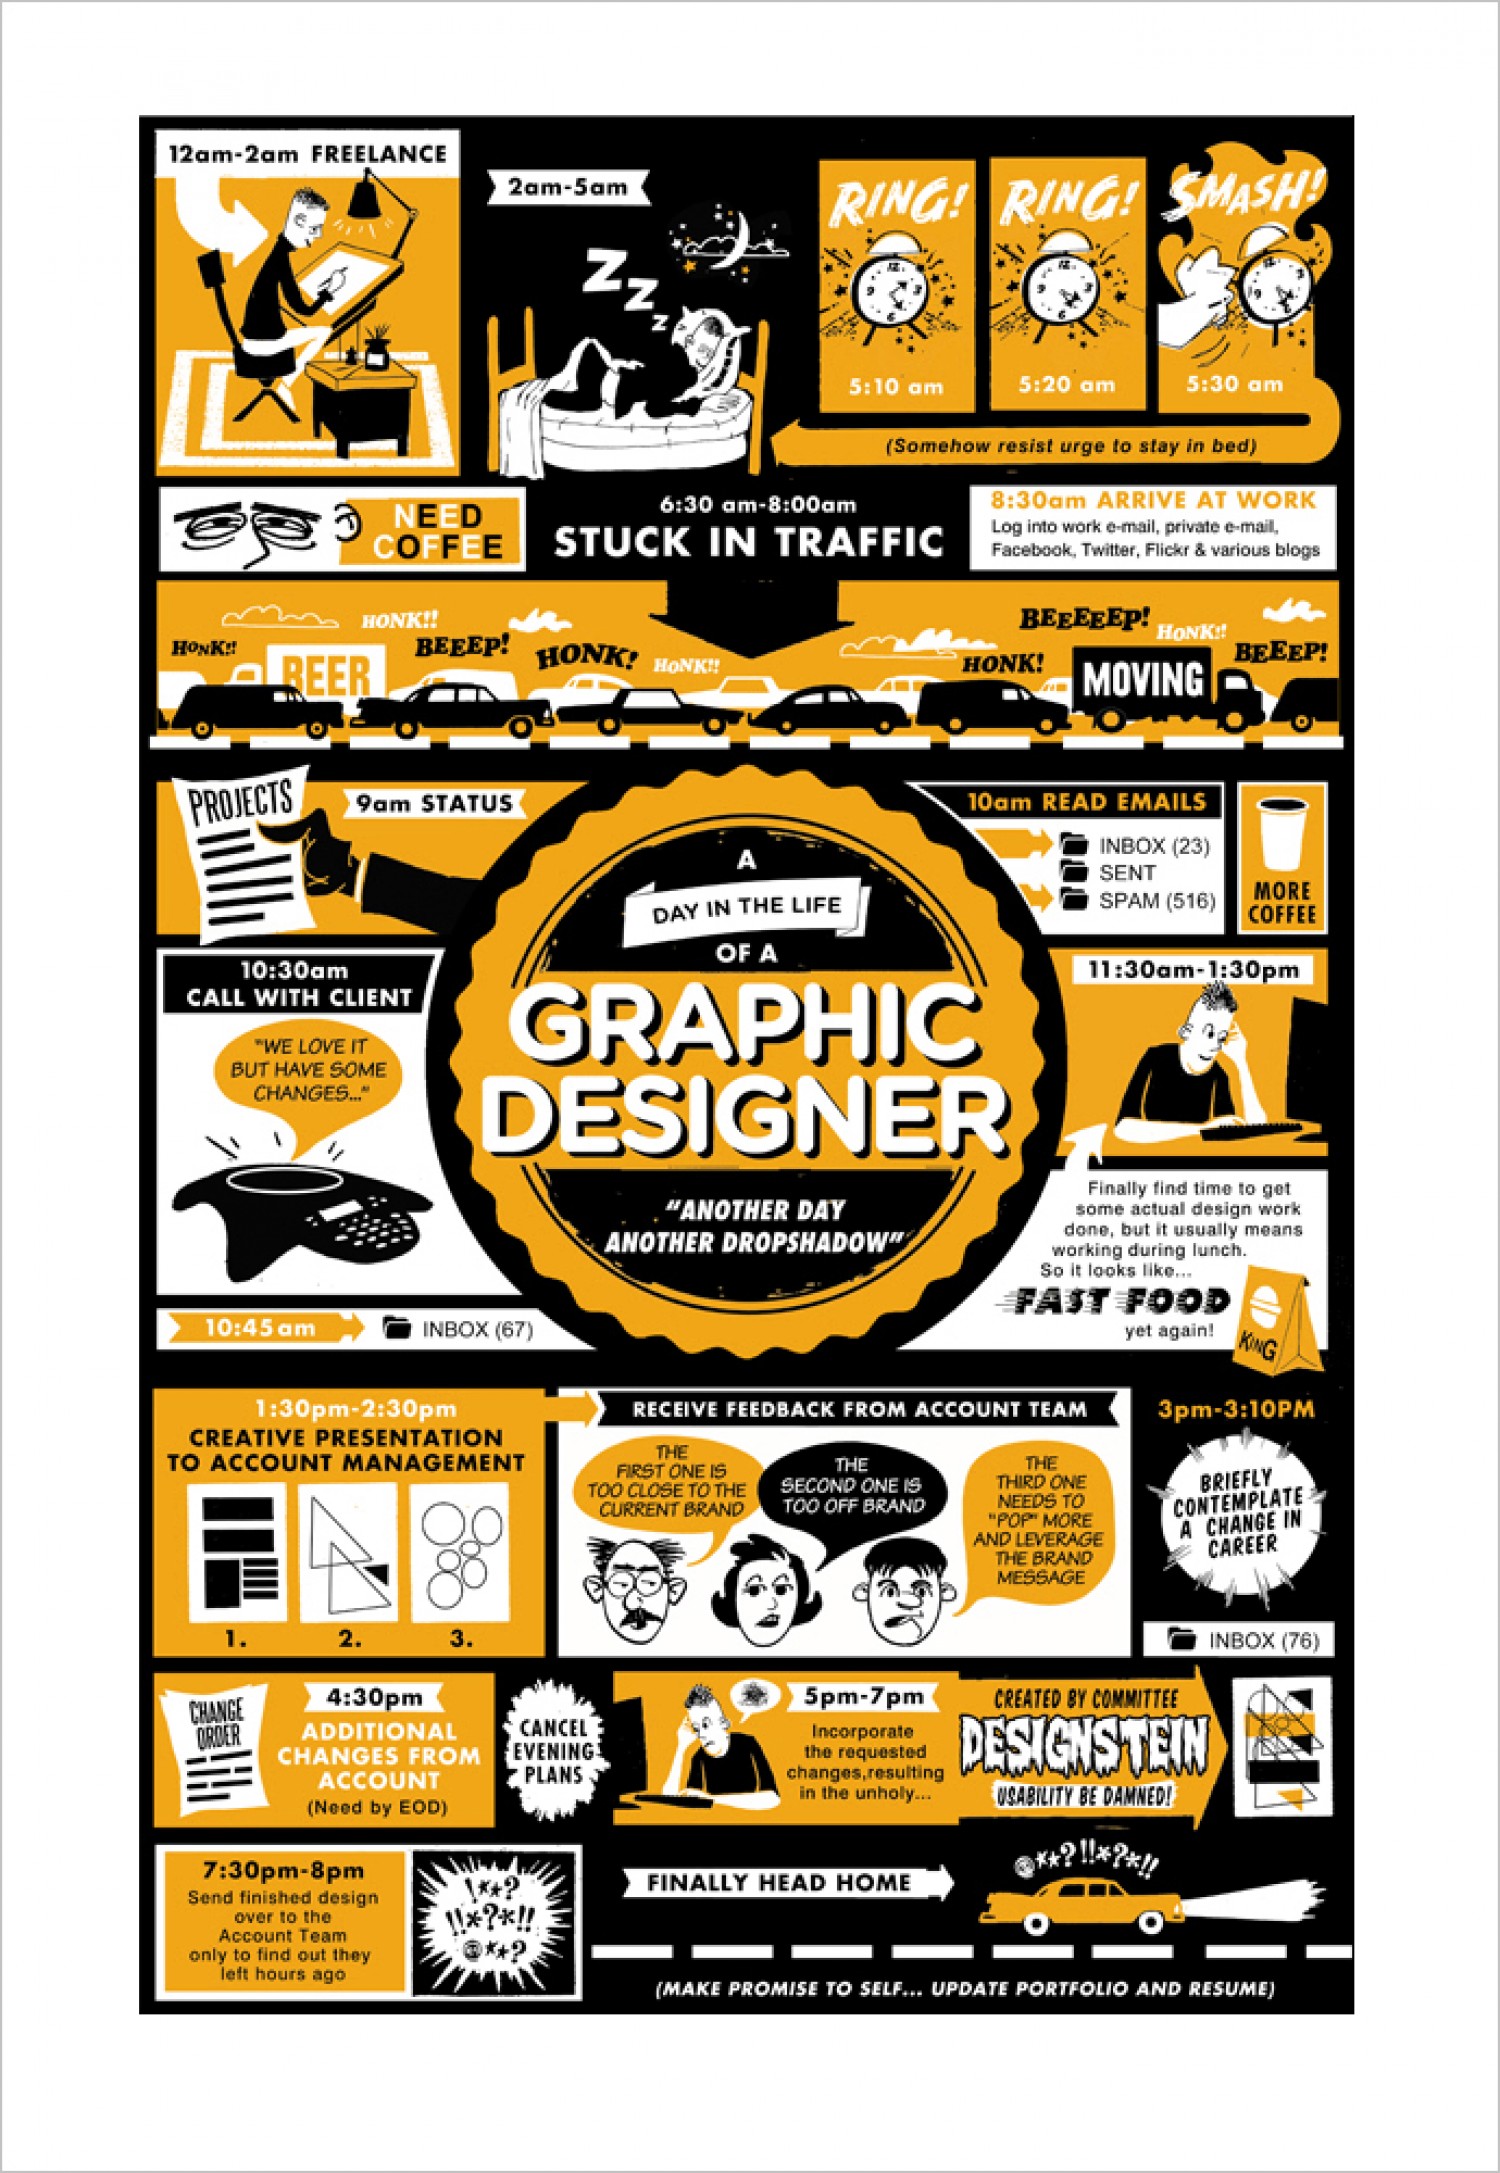 a-day-in-the-life-of-a-graphic-designer_50290d037d6cb_w1500